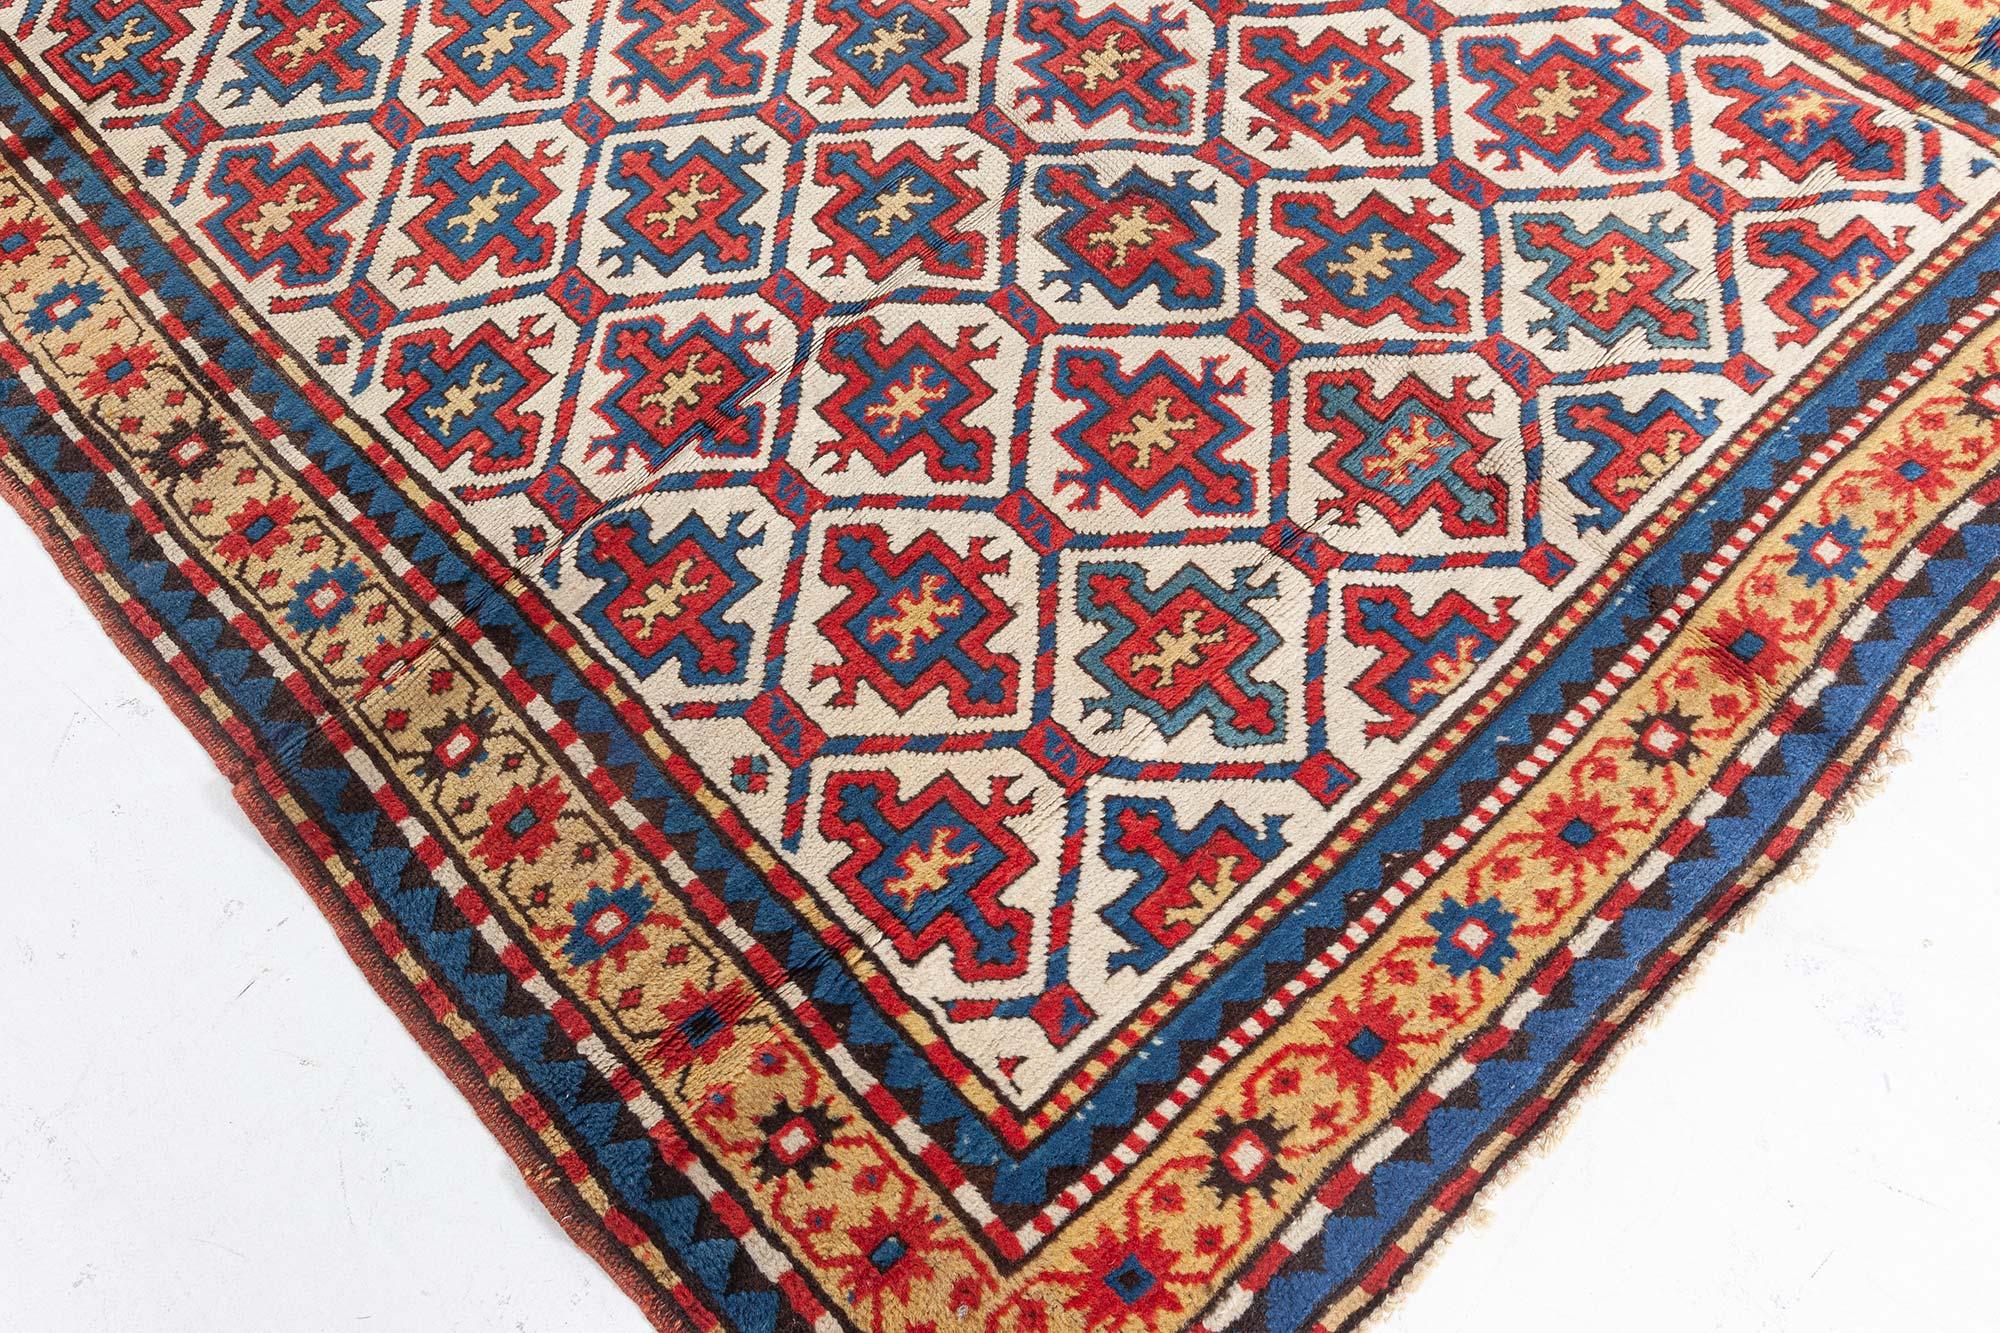 19th Century Kazak Handmade Wool Rug In Good Condition For Sale In New York, NY